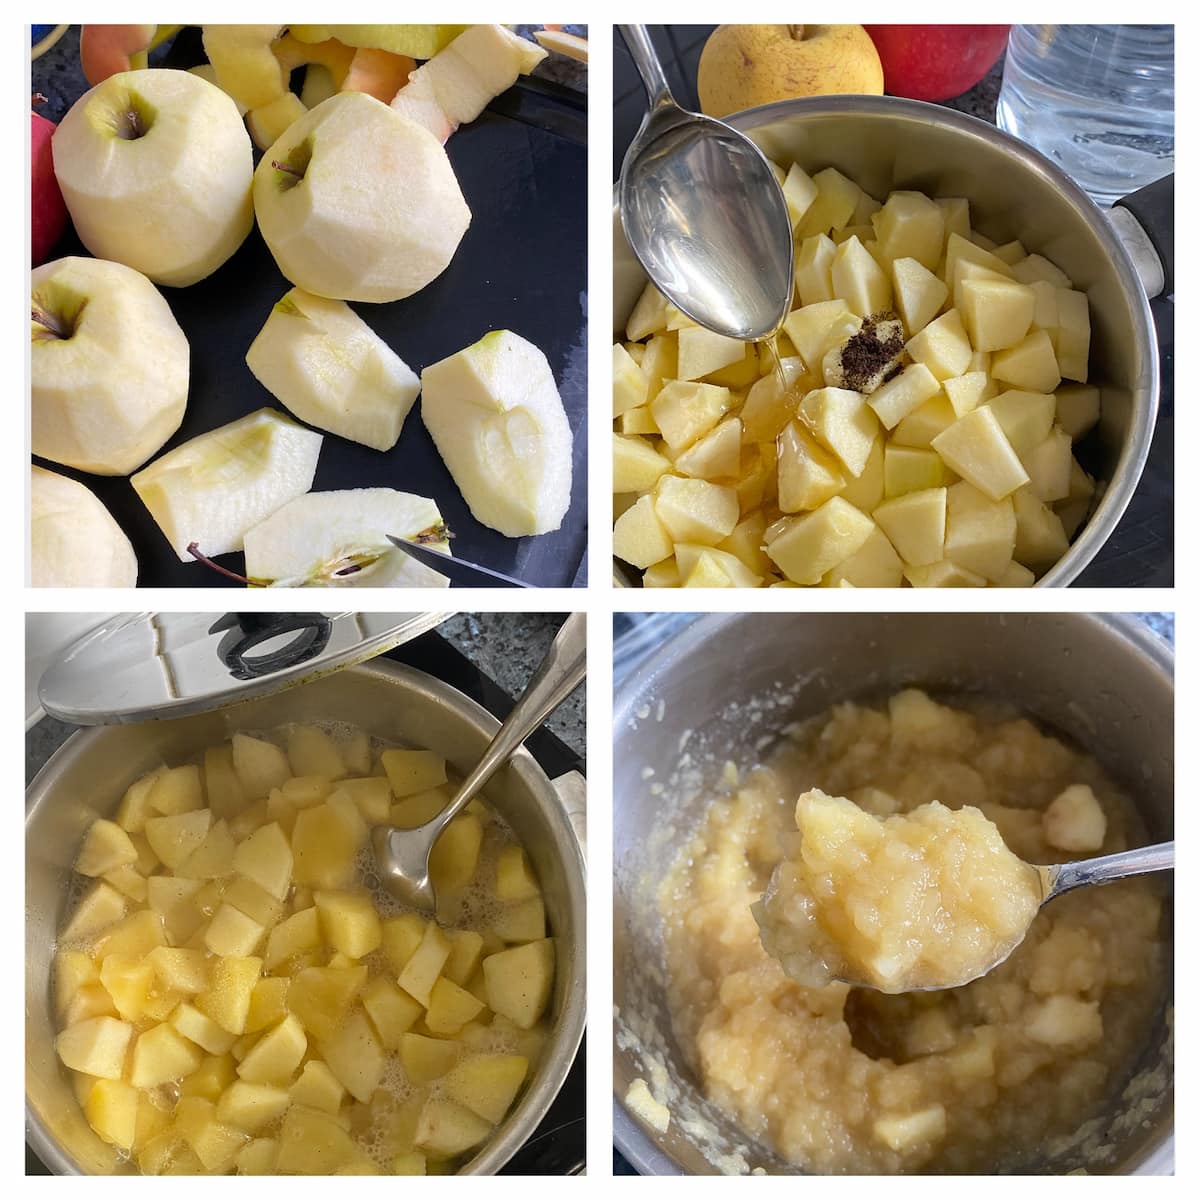 steps shown how to stew apples into a sauce